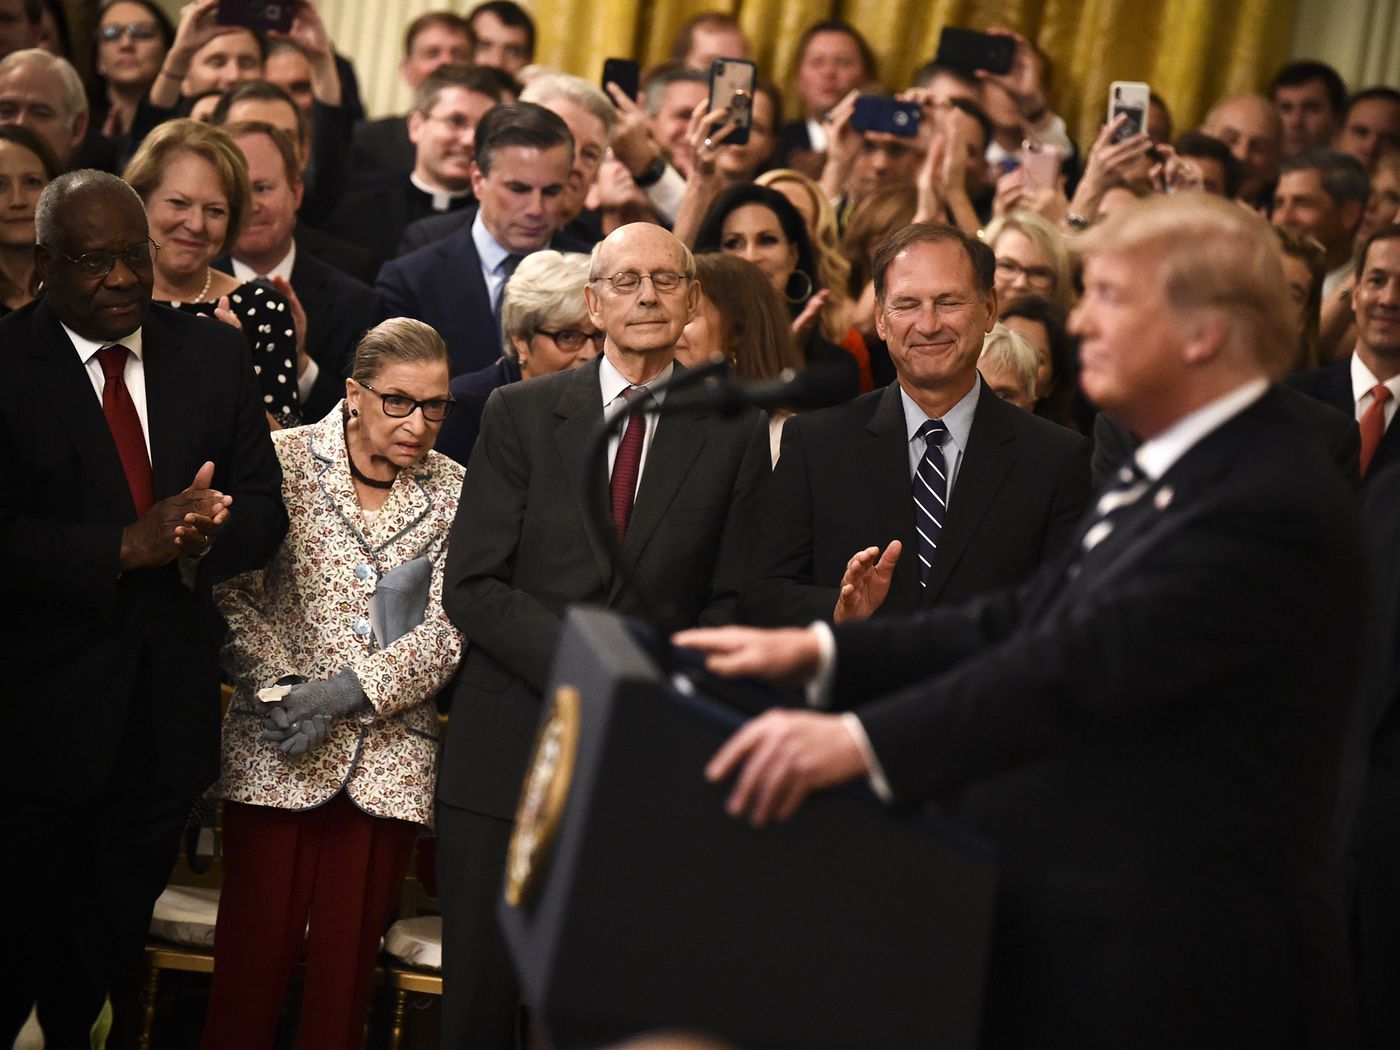 Ruth Bader Ginsburg: The One Thing Democrats Can Do To Stop Trump From Replacing Her May Be Court Packing